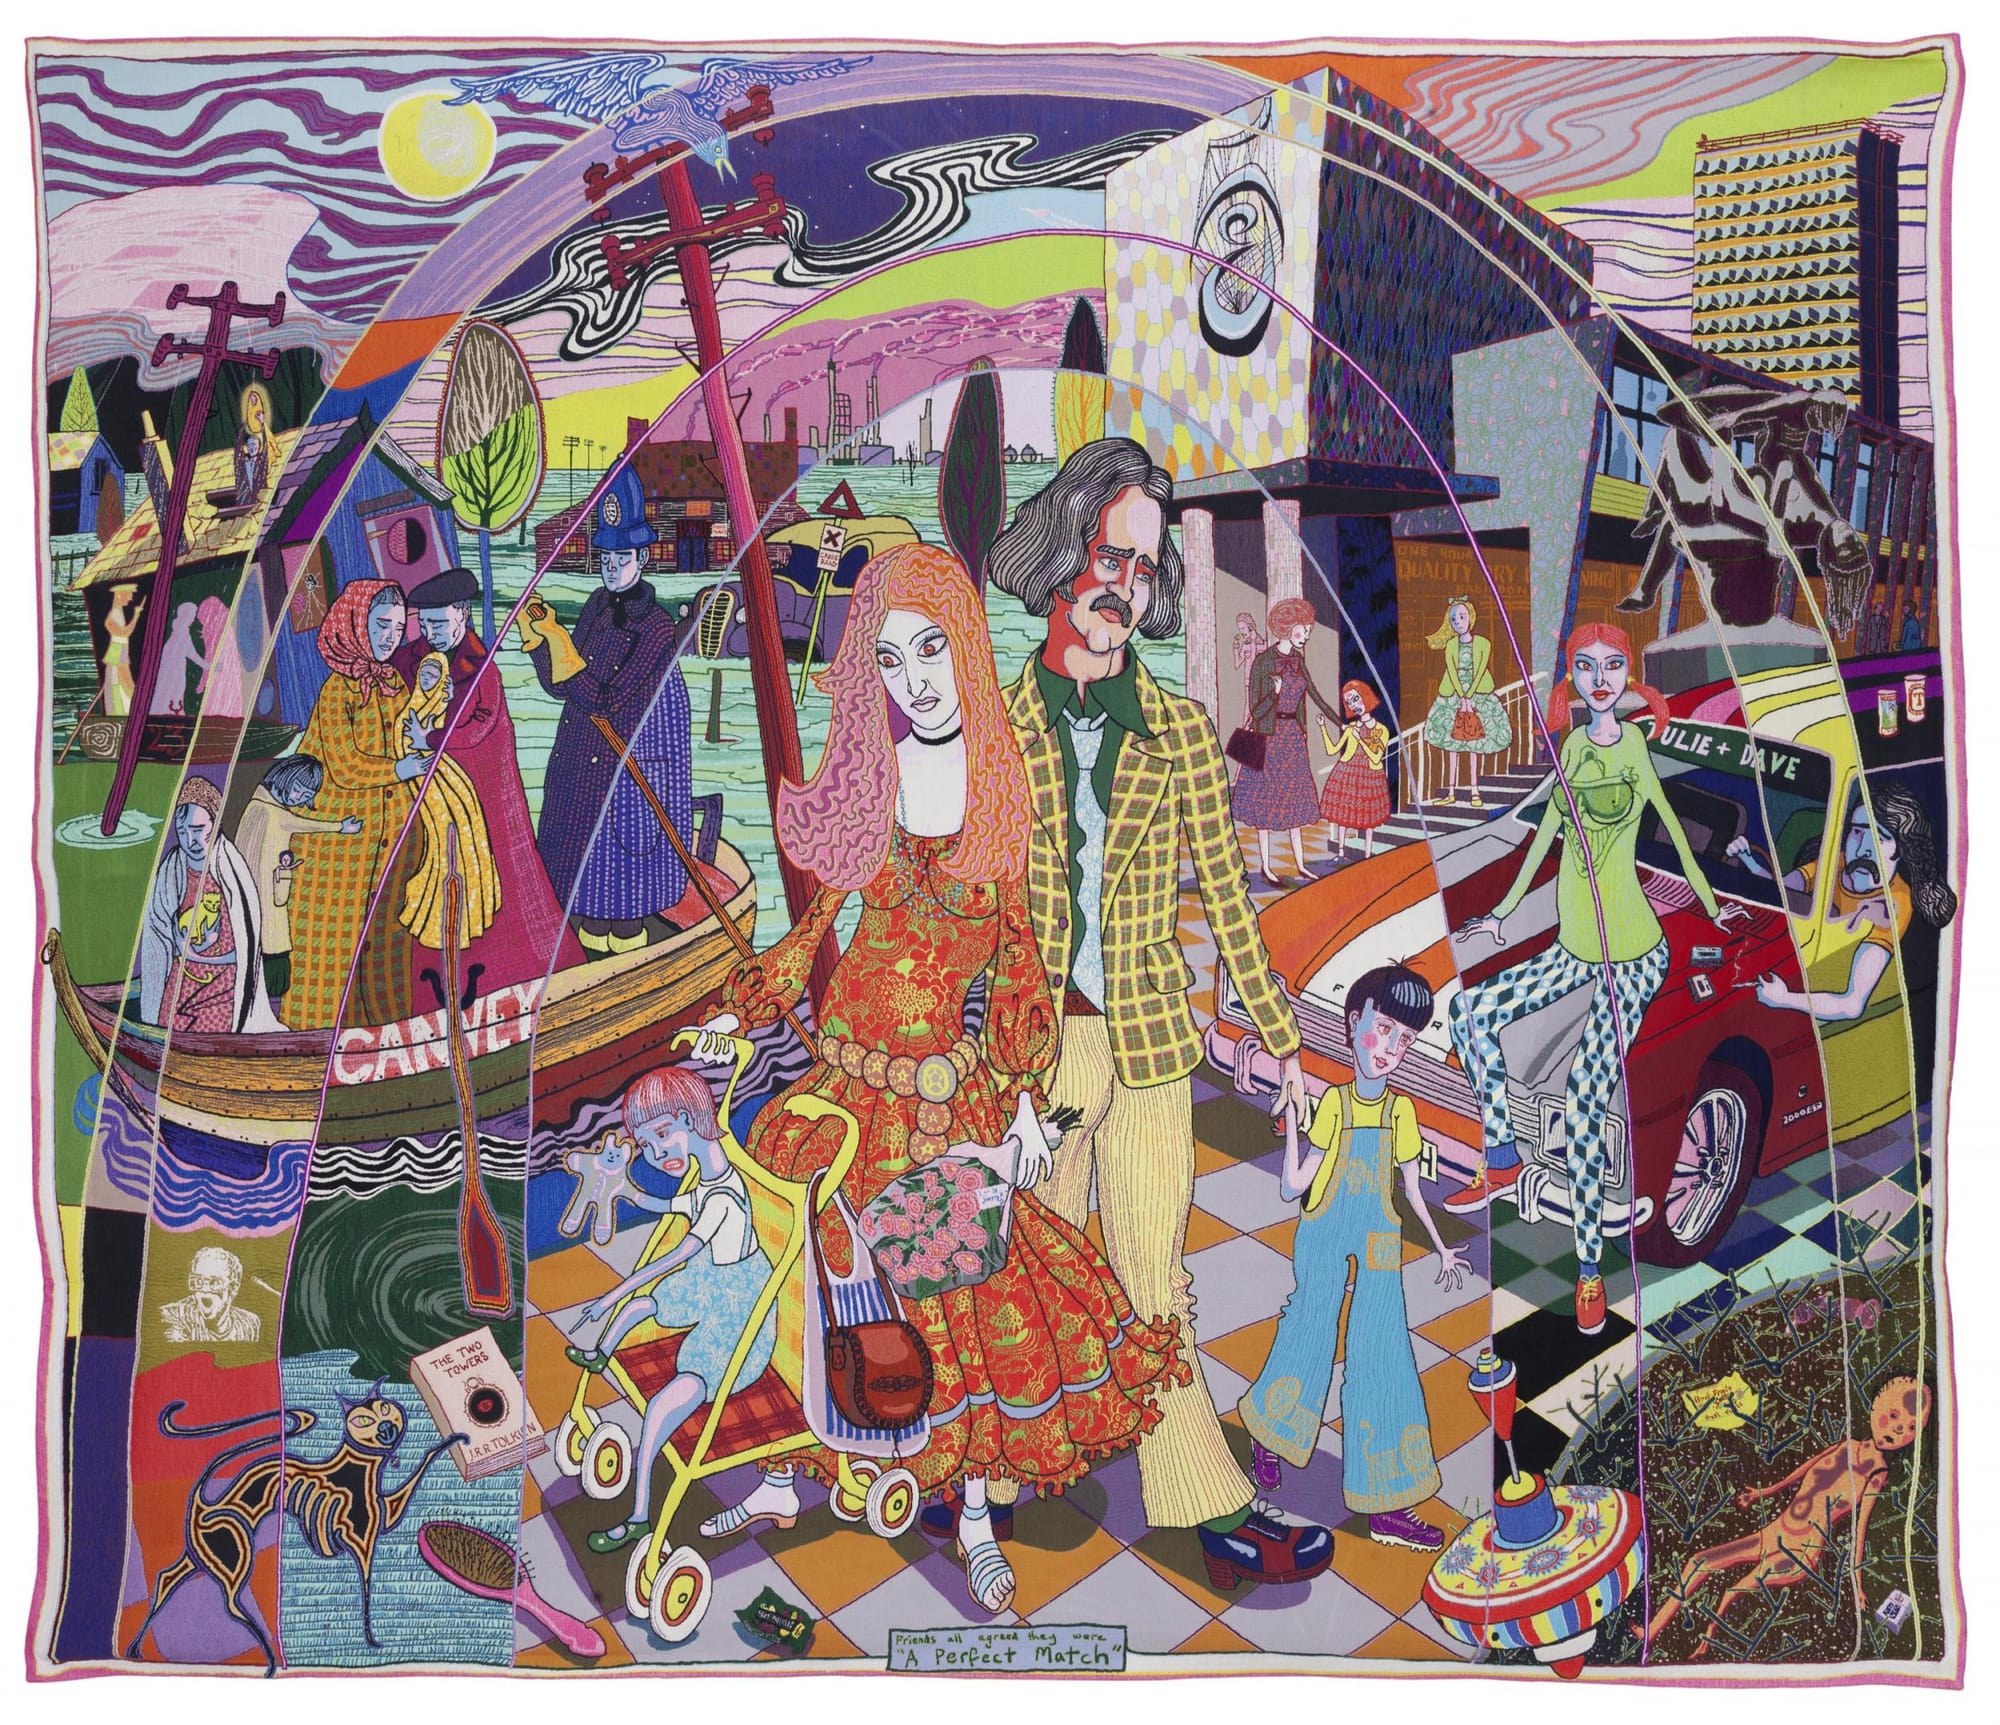 Grayson Perry’s Essex House Tapestries come to Winchester